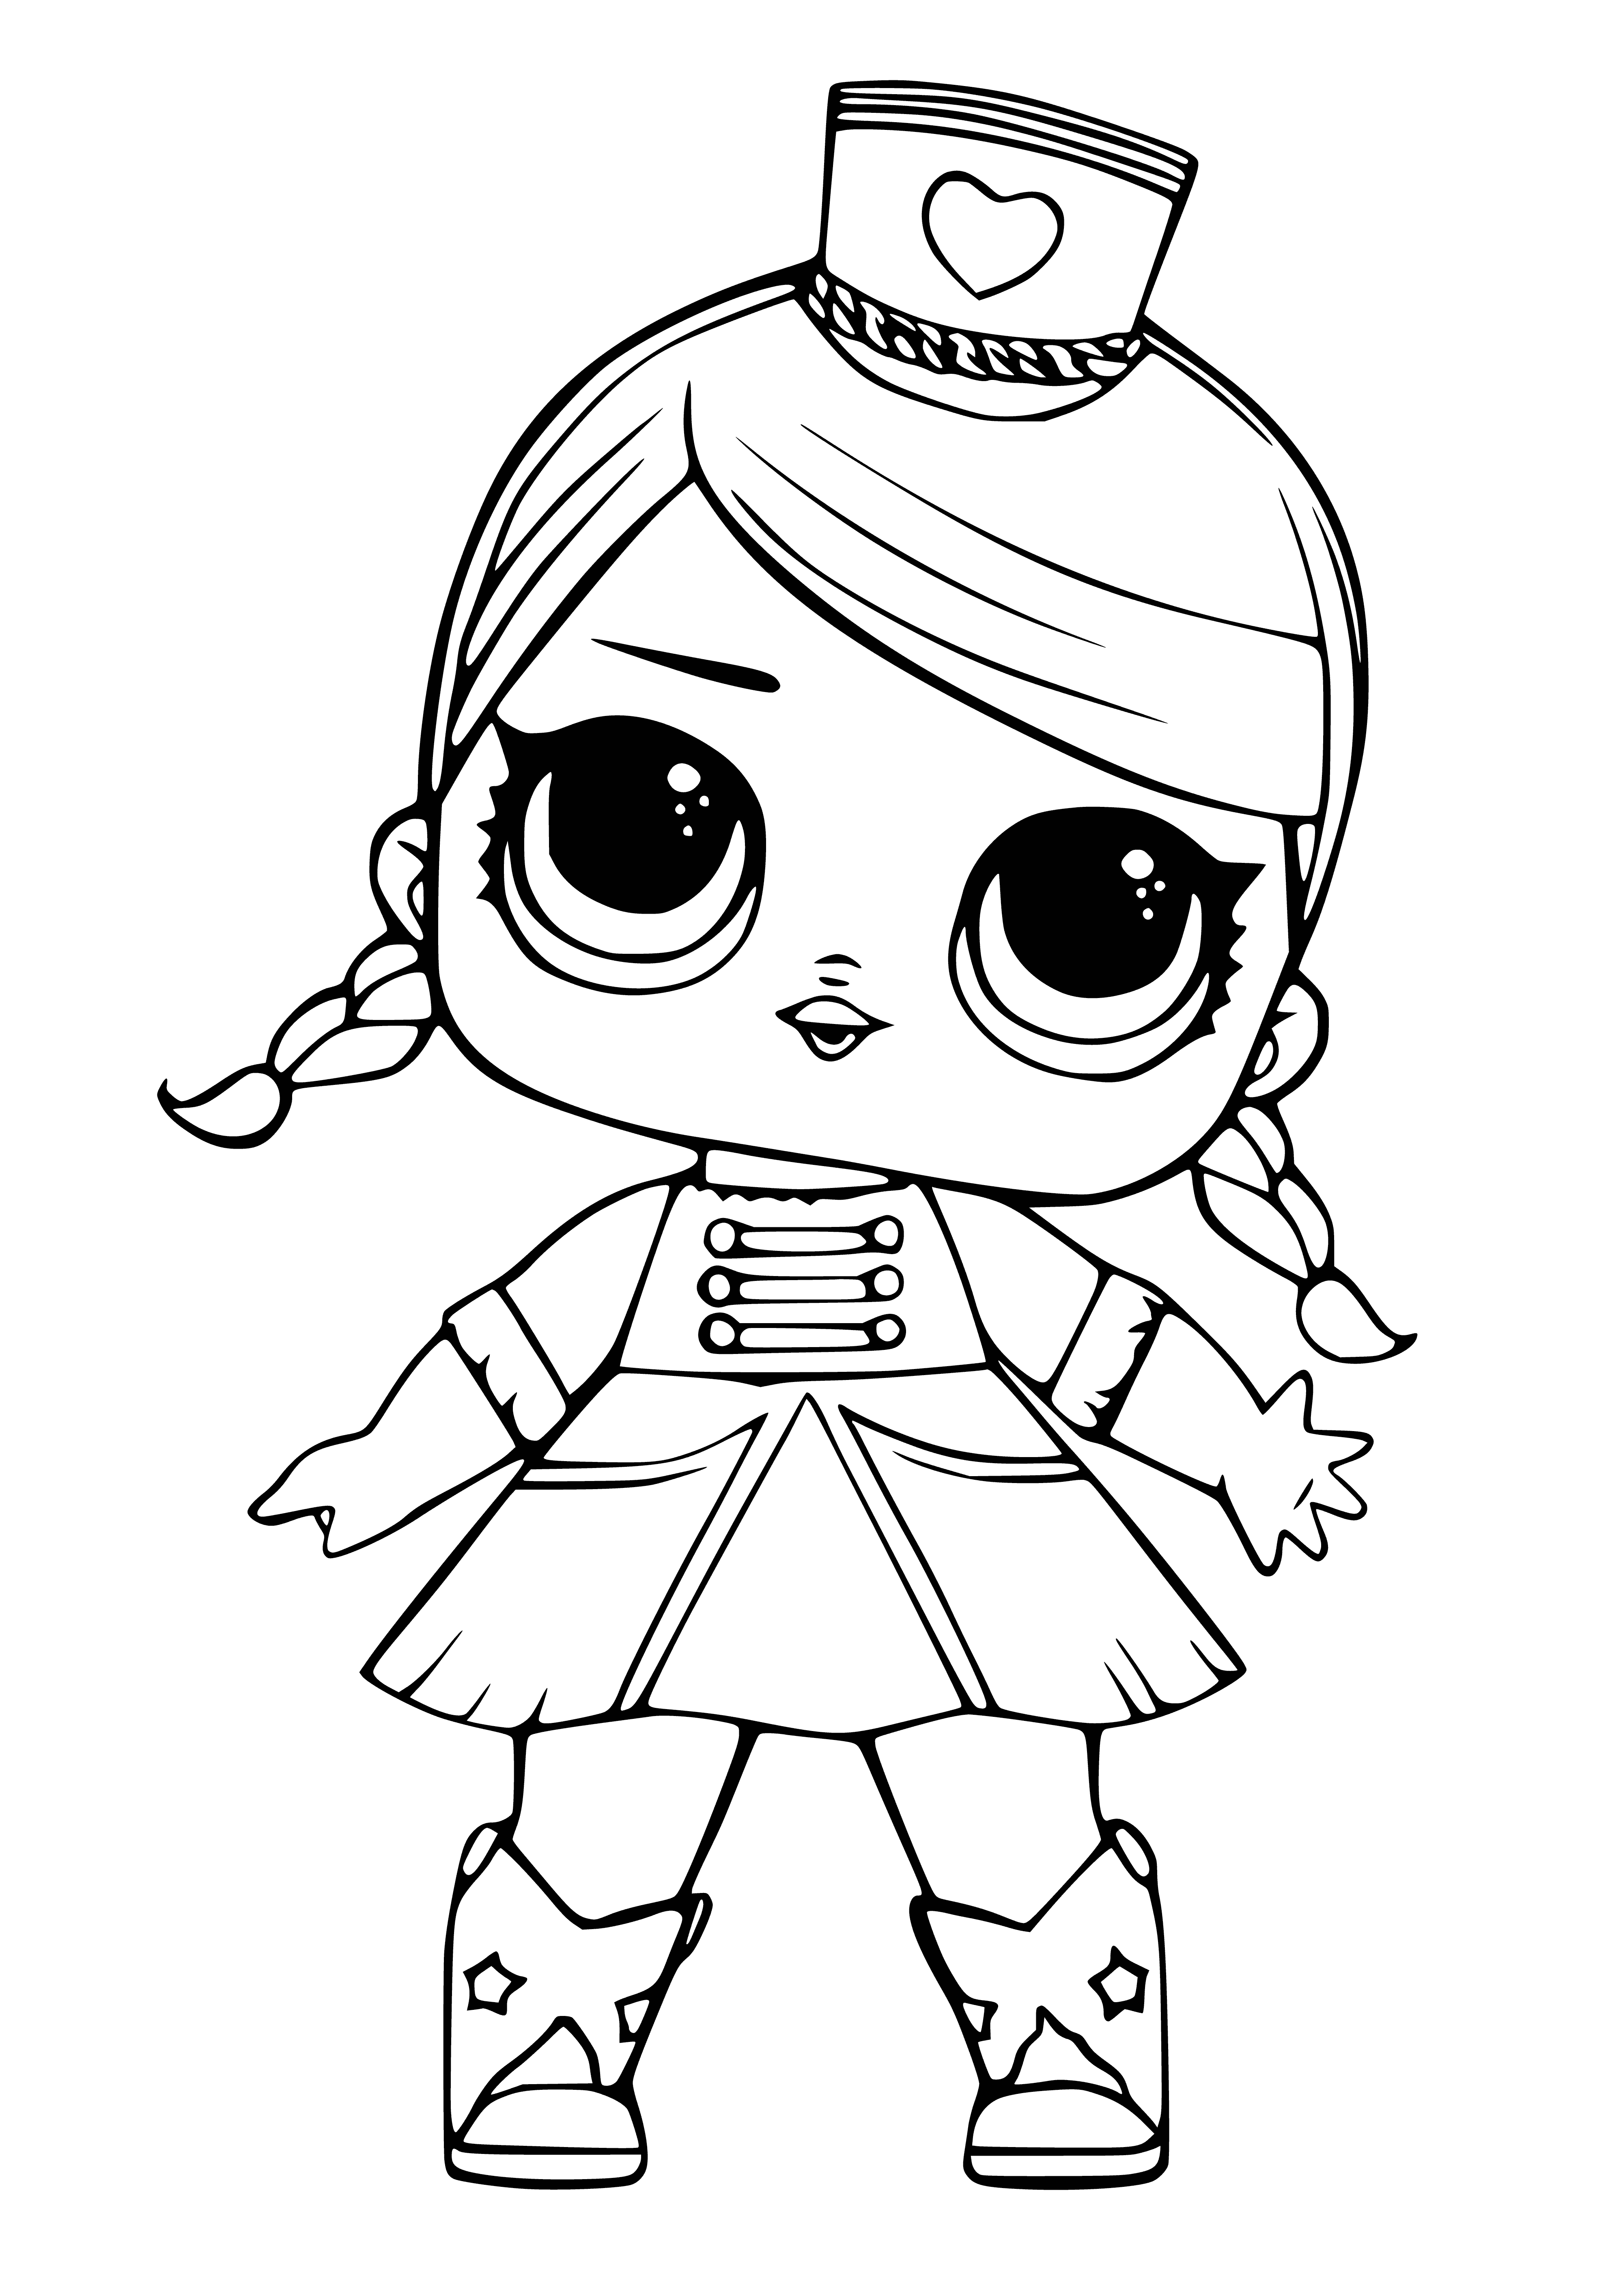 coloring page: LOL - LOL Majorette Series 1 offers 10 poseable 2.5" plastic figurines with colorful uniforms & stripes.